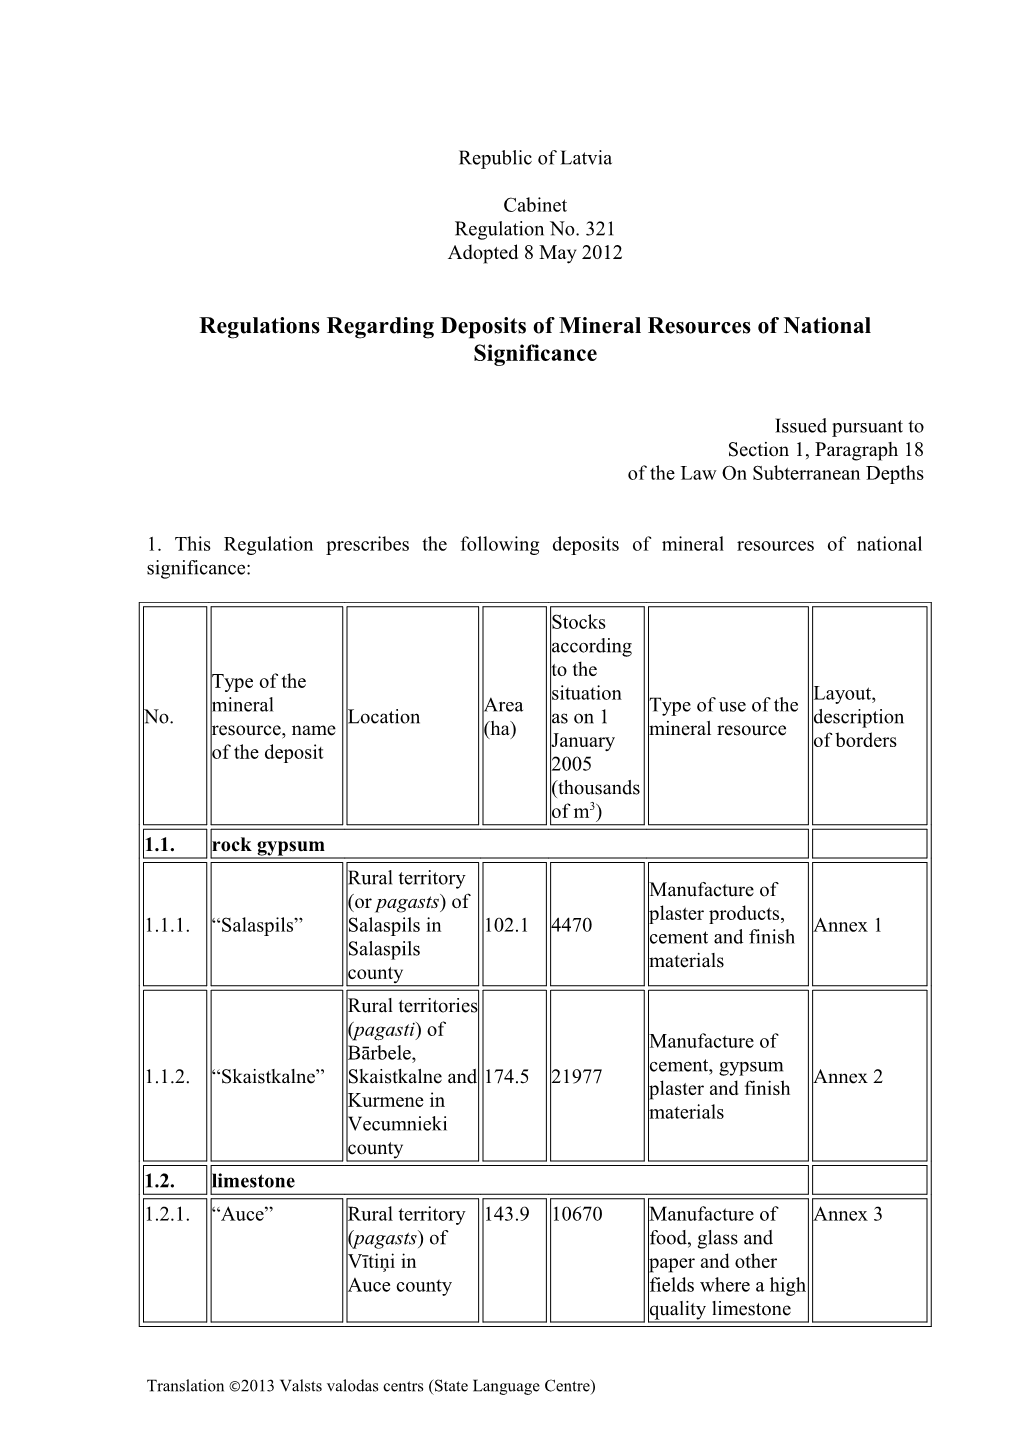 Regulations Regarding Deposits of Mineral Resources of National Significance